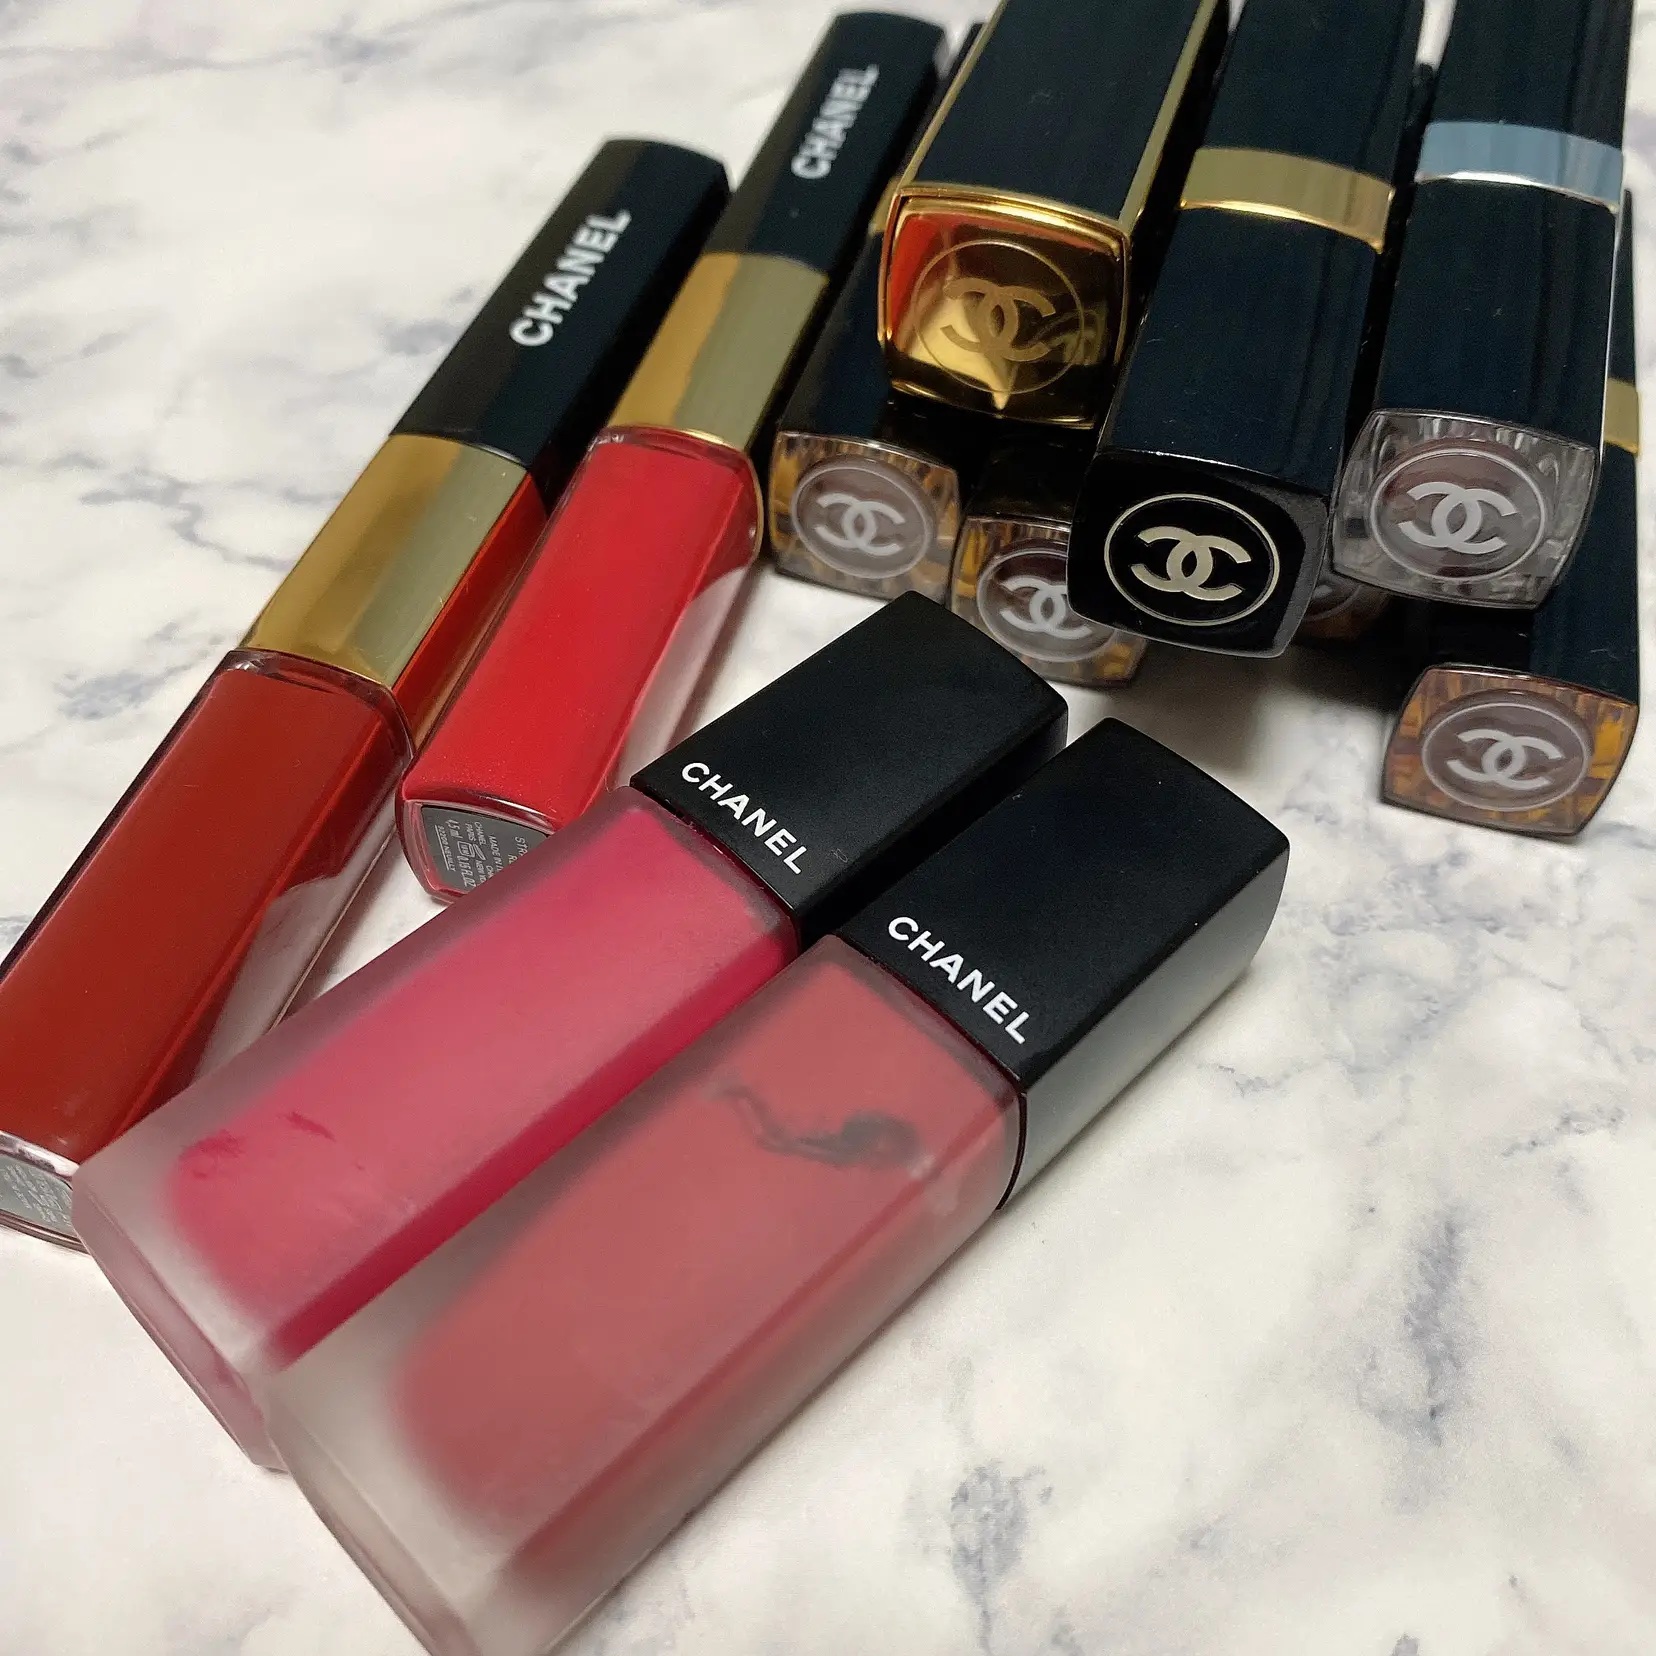 CHANEL Glossimers DISCONTINUED?!?! Introducing the NEW Rouge Coco